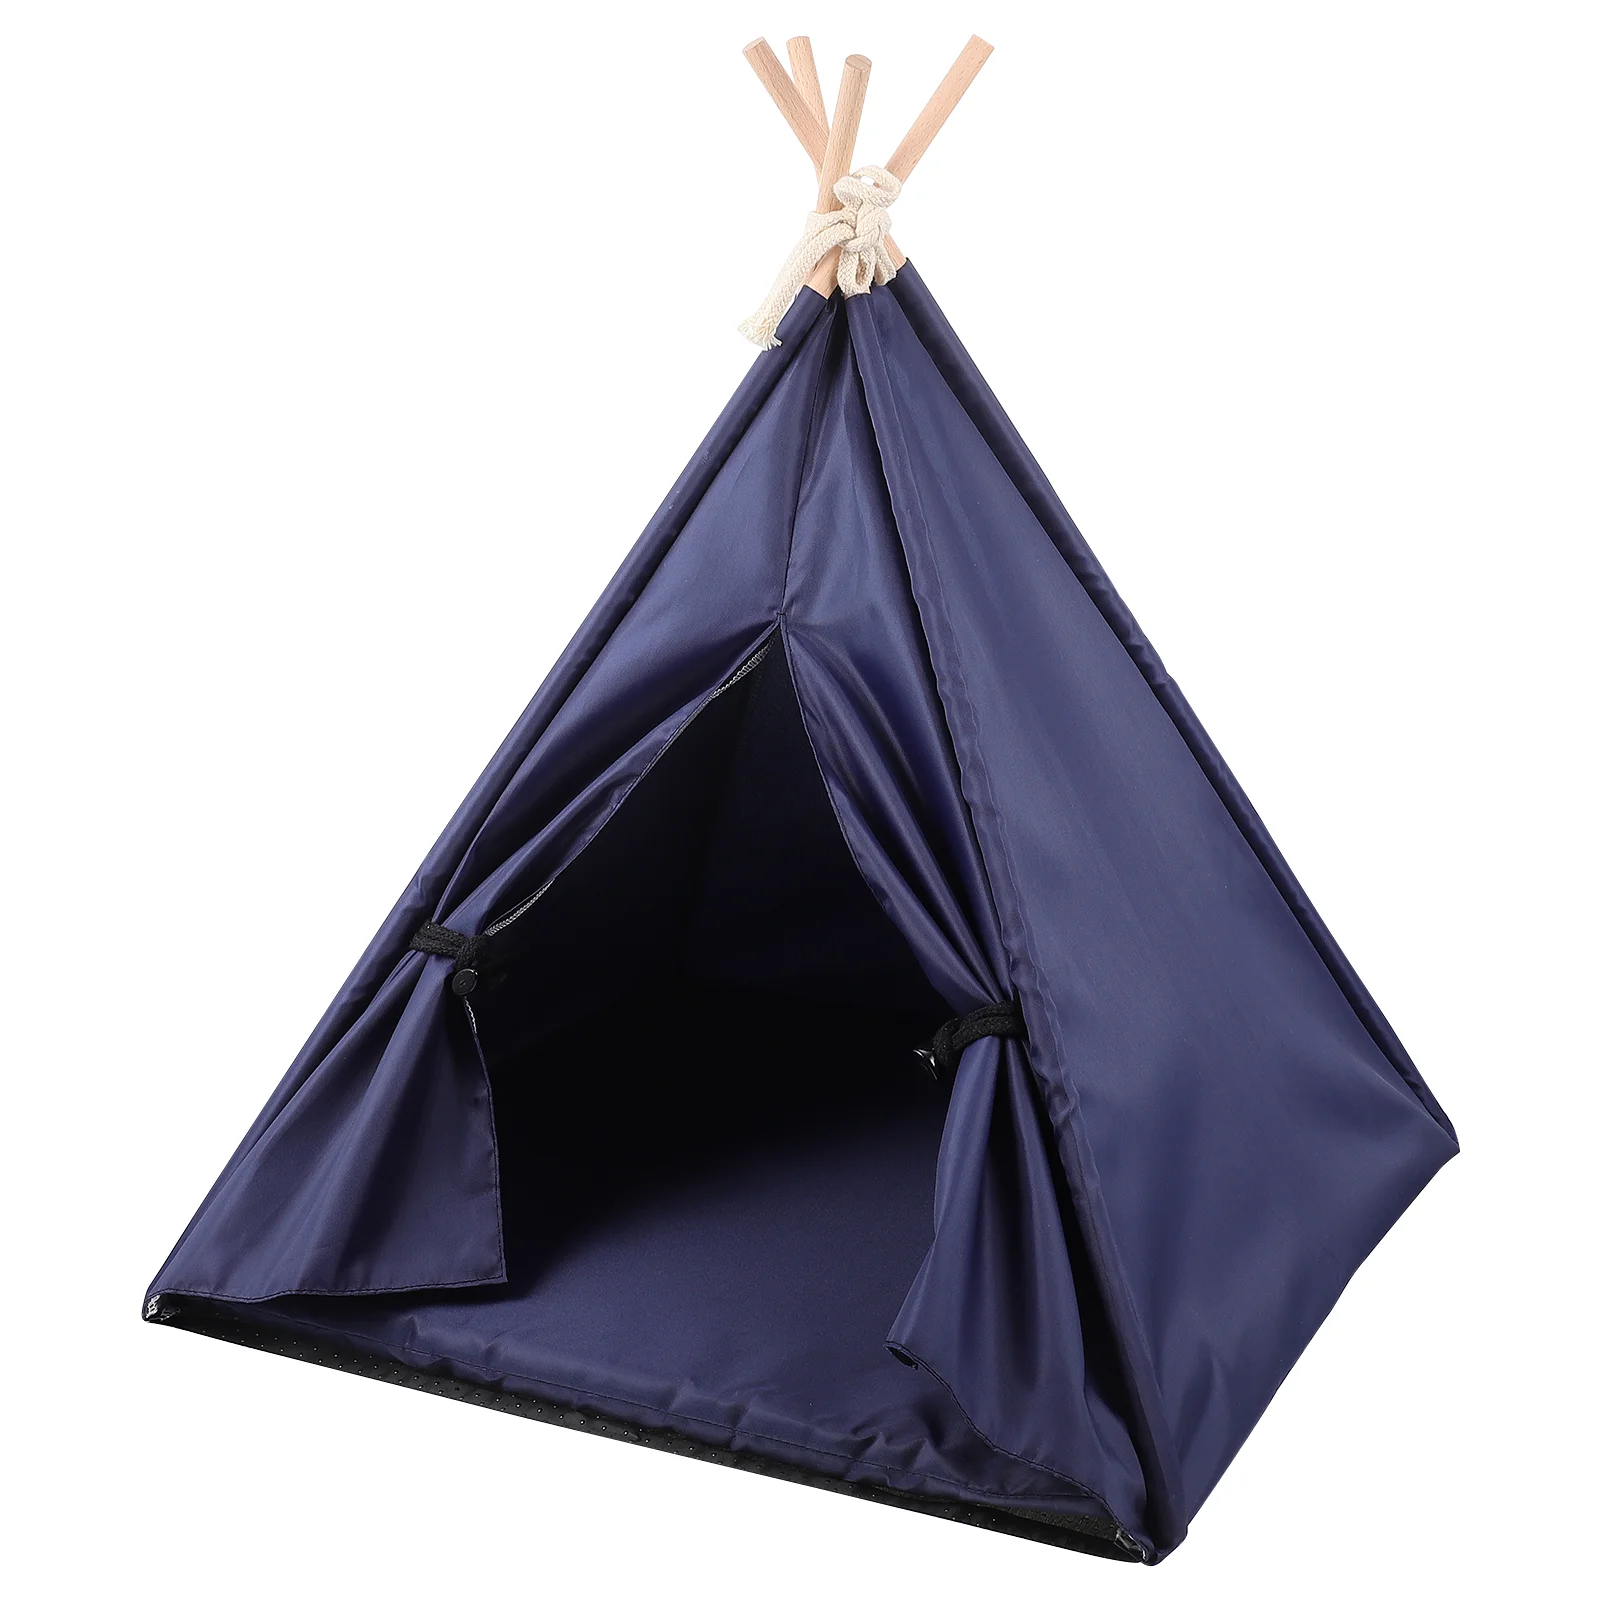 

Tent Dog Cat Teepee Bed Pet Tents Cats Indoor Mini Dogs Cave Large Pets Outdoor House Kitten Hiding Sleeping Tee Pee Camping